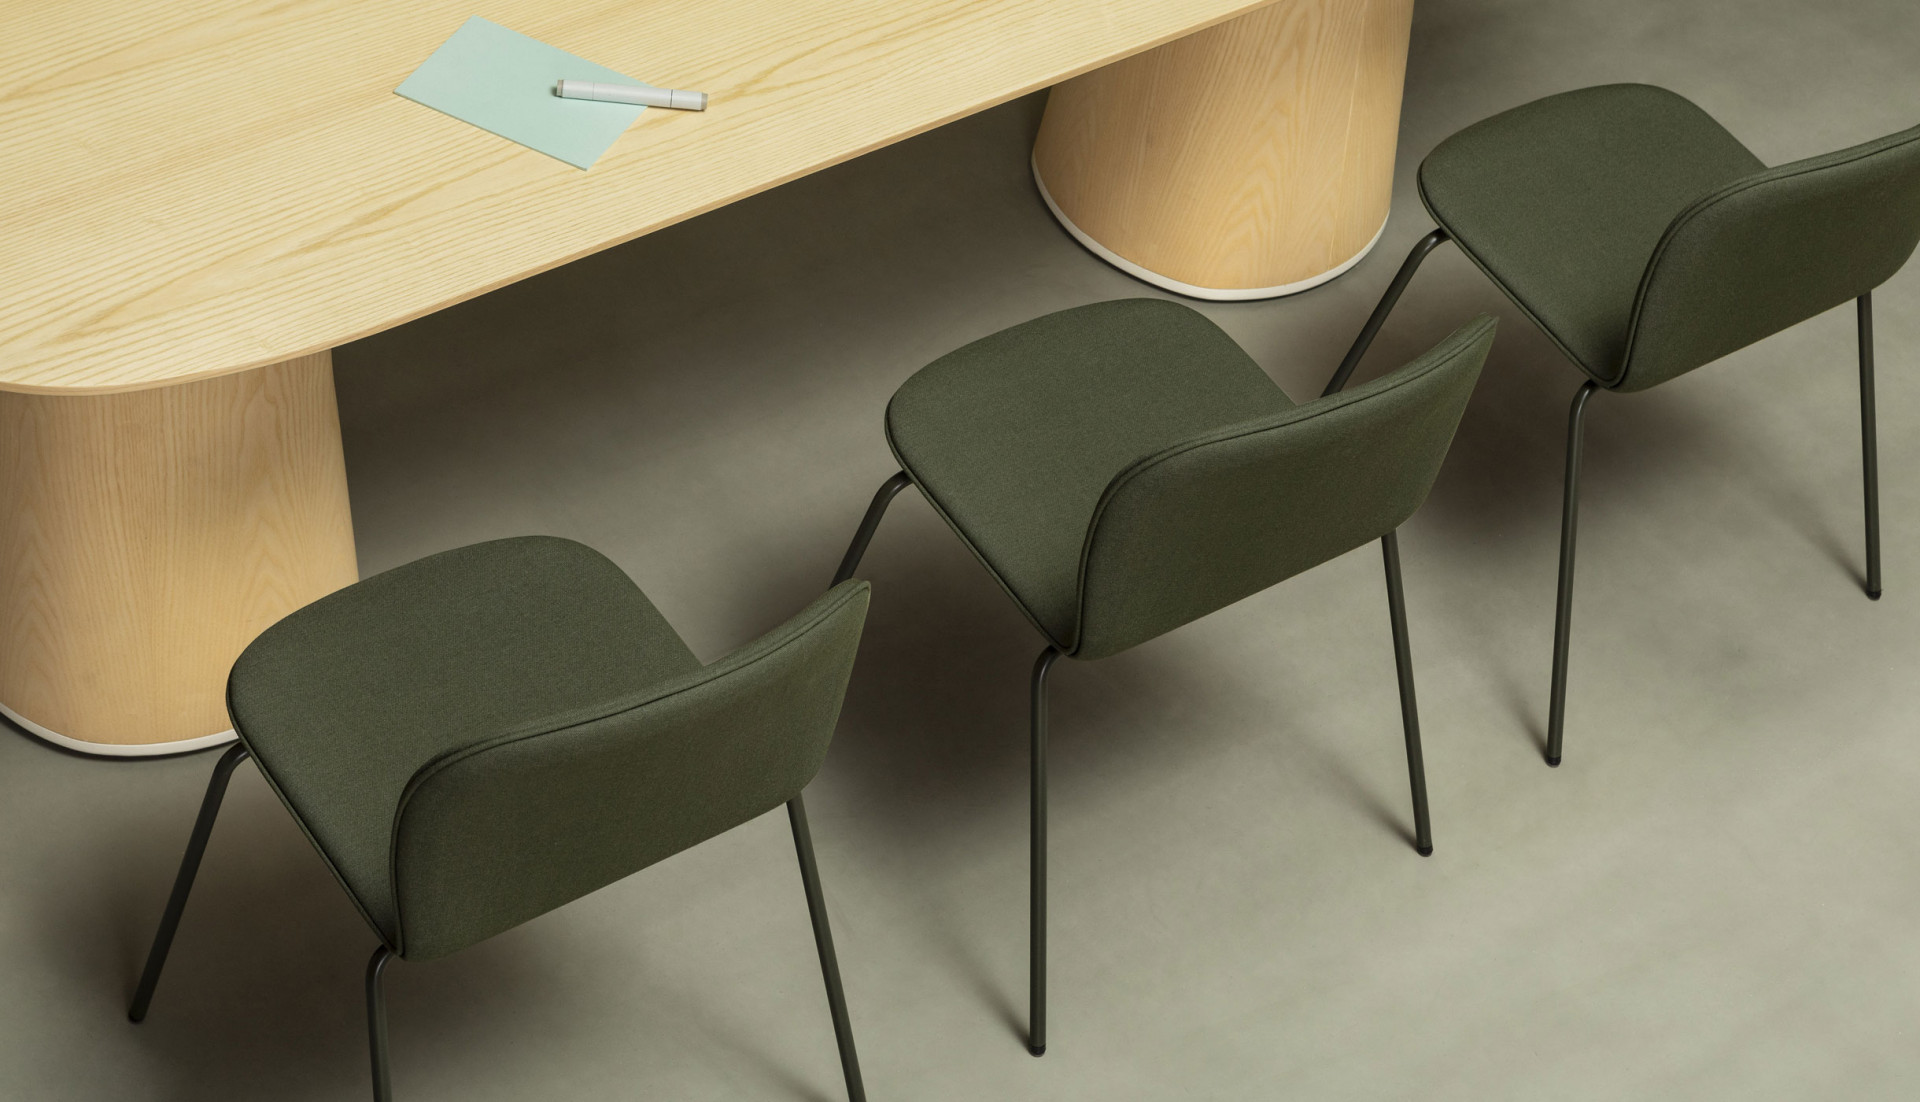 Ona chair with wooden legs - Vergés